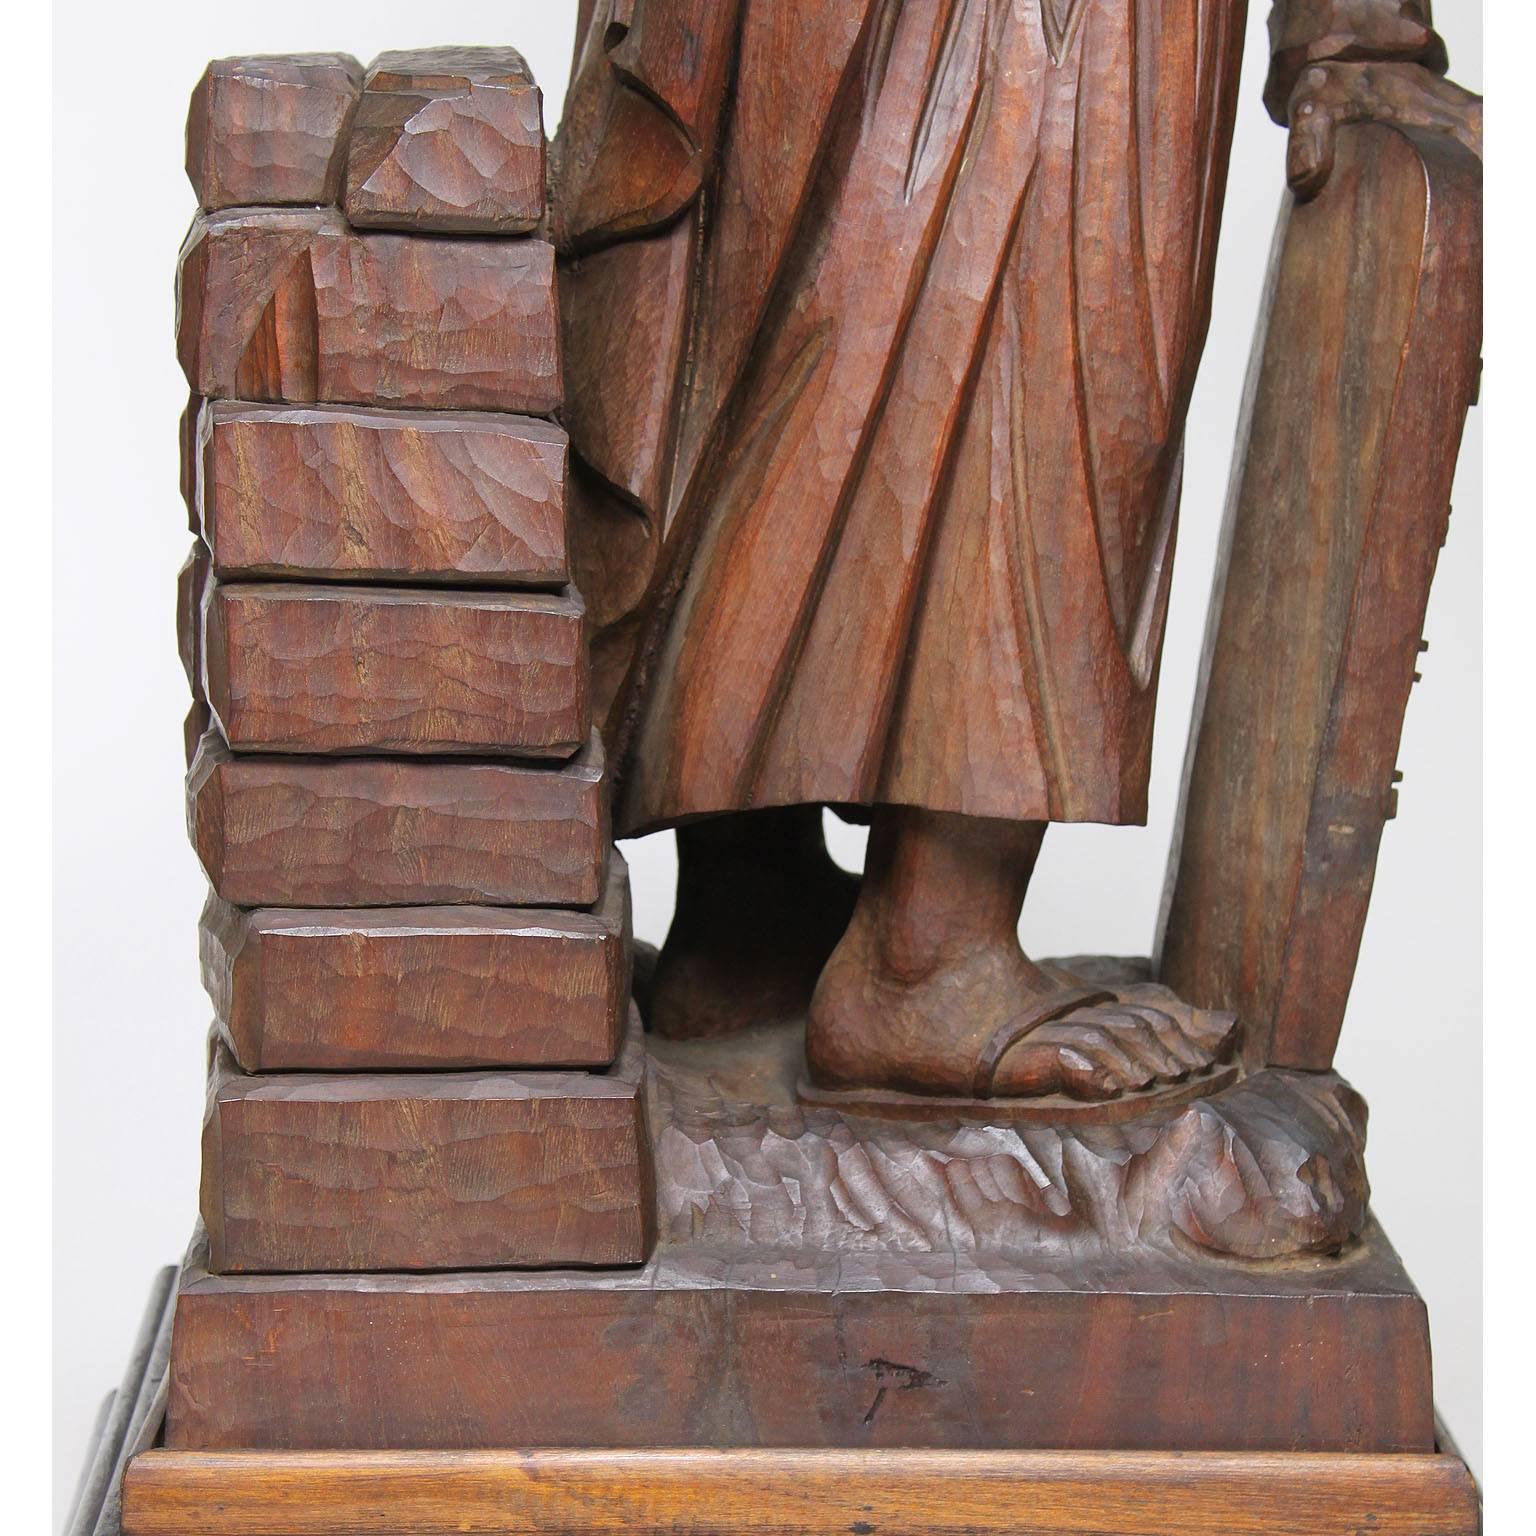 19th-20th Century Renaissance Carved Wood Judica Figure of Michelangelo's Moses For Sale 2